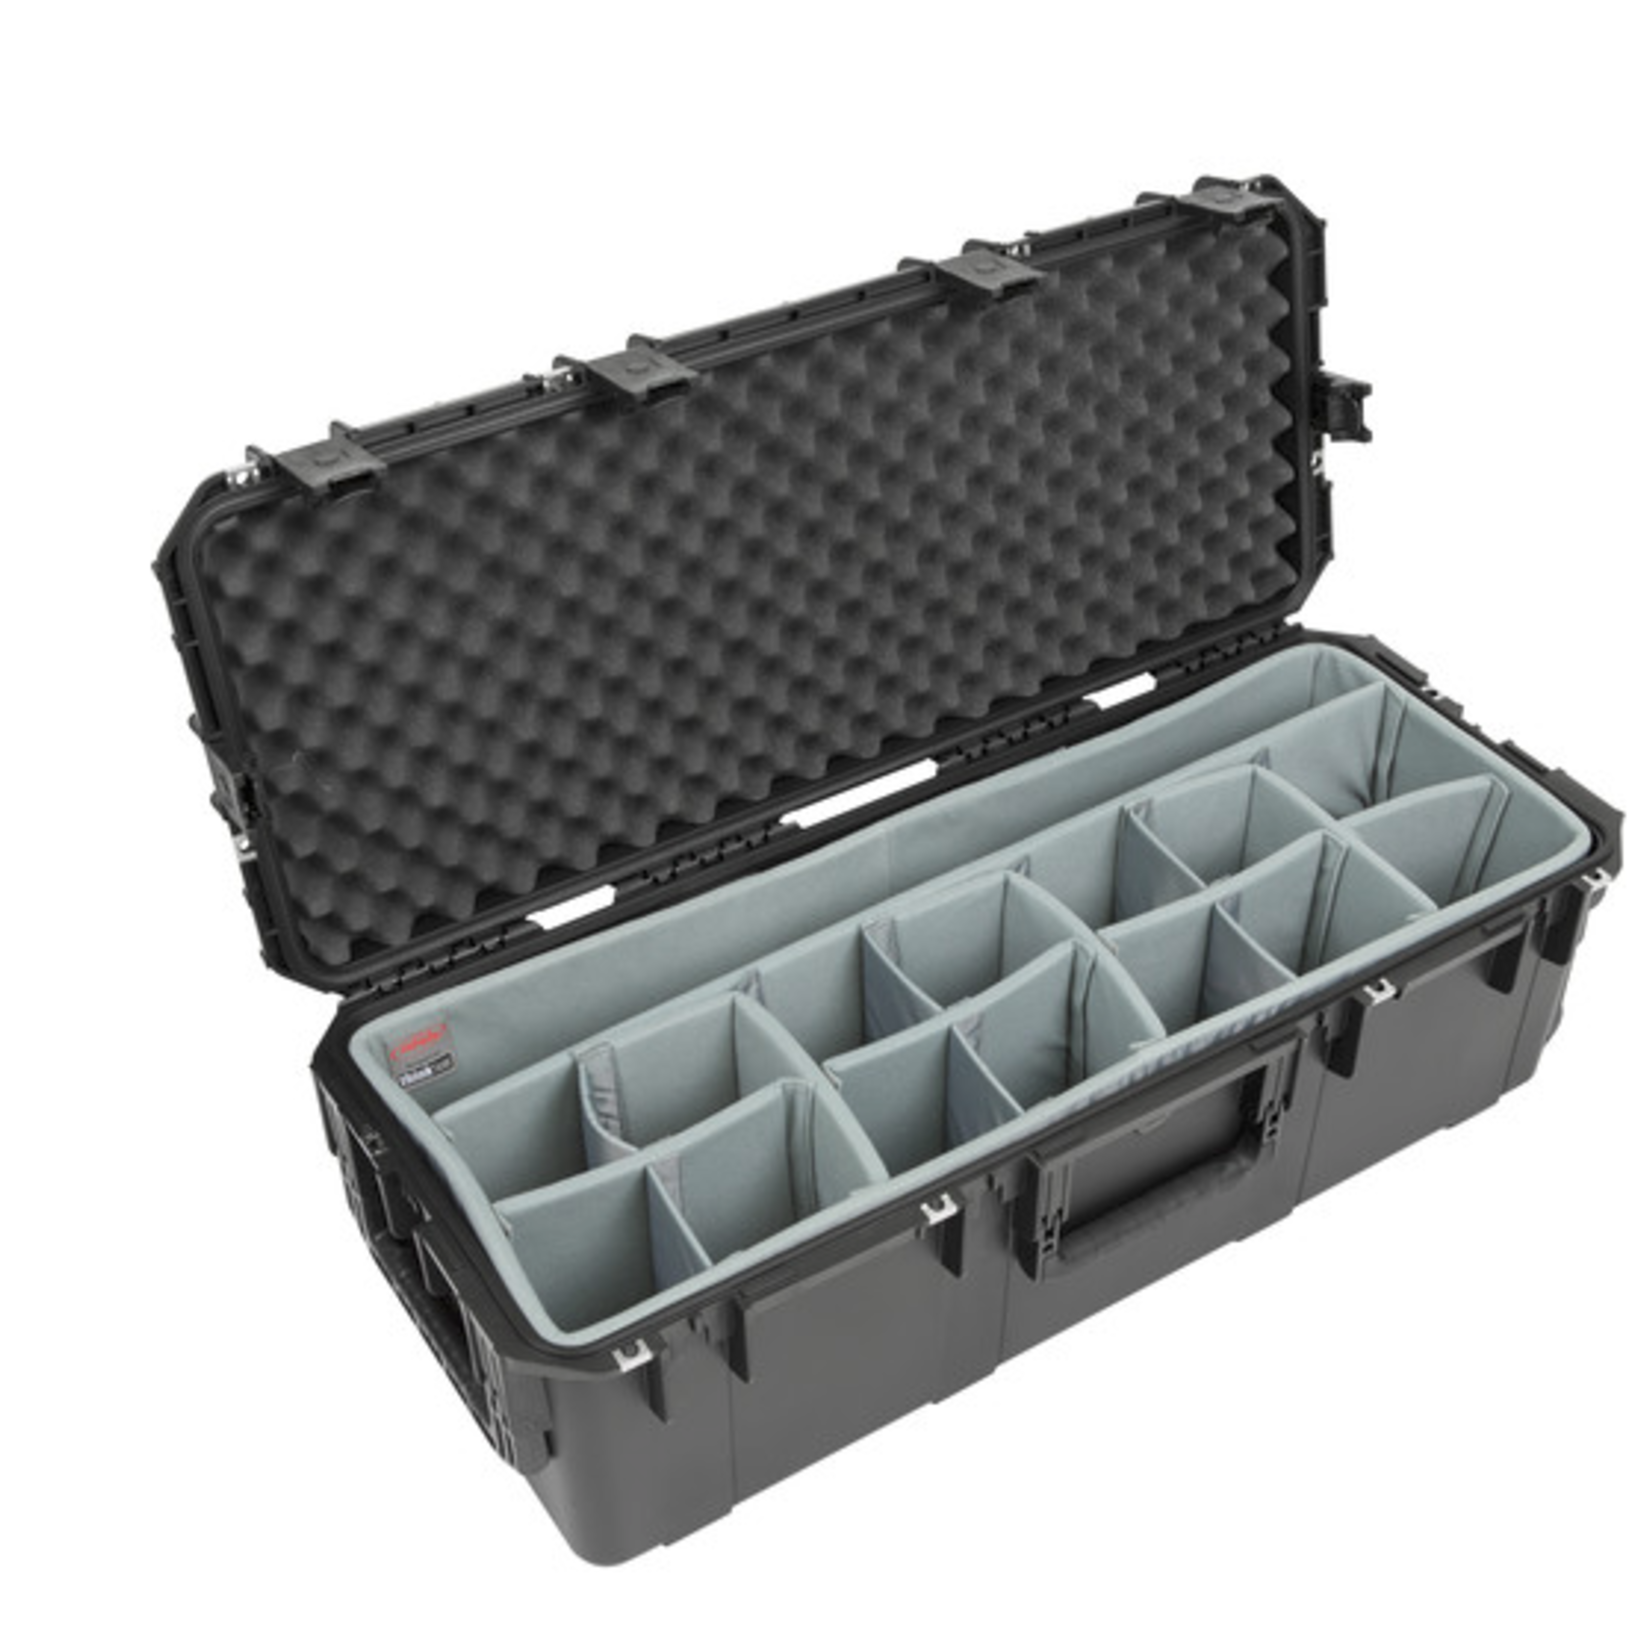 SKB Cases SKB iSeries 3613-12 Case with Think Tank Lighting/Stand Dividers & Lid Foam (Black)